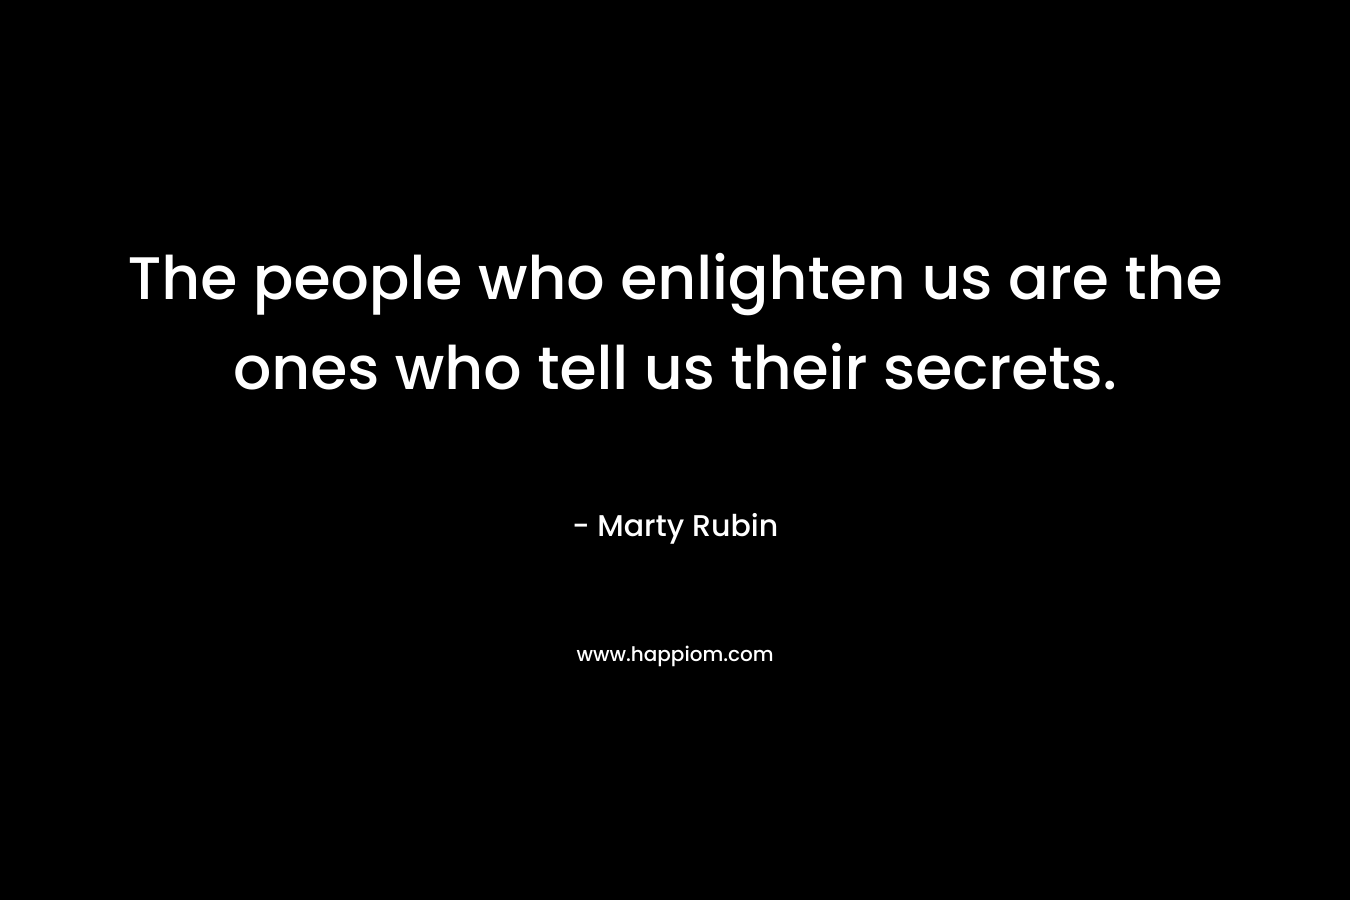 The people who enlighten us are the ones who tell us their secrets.